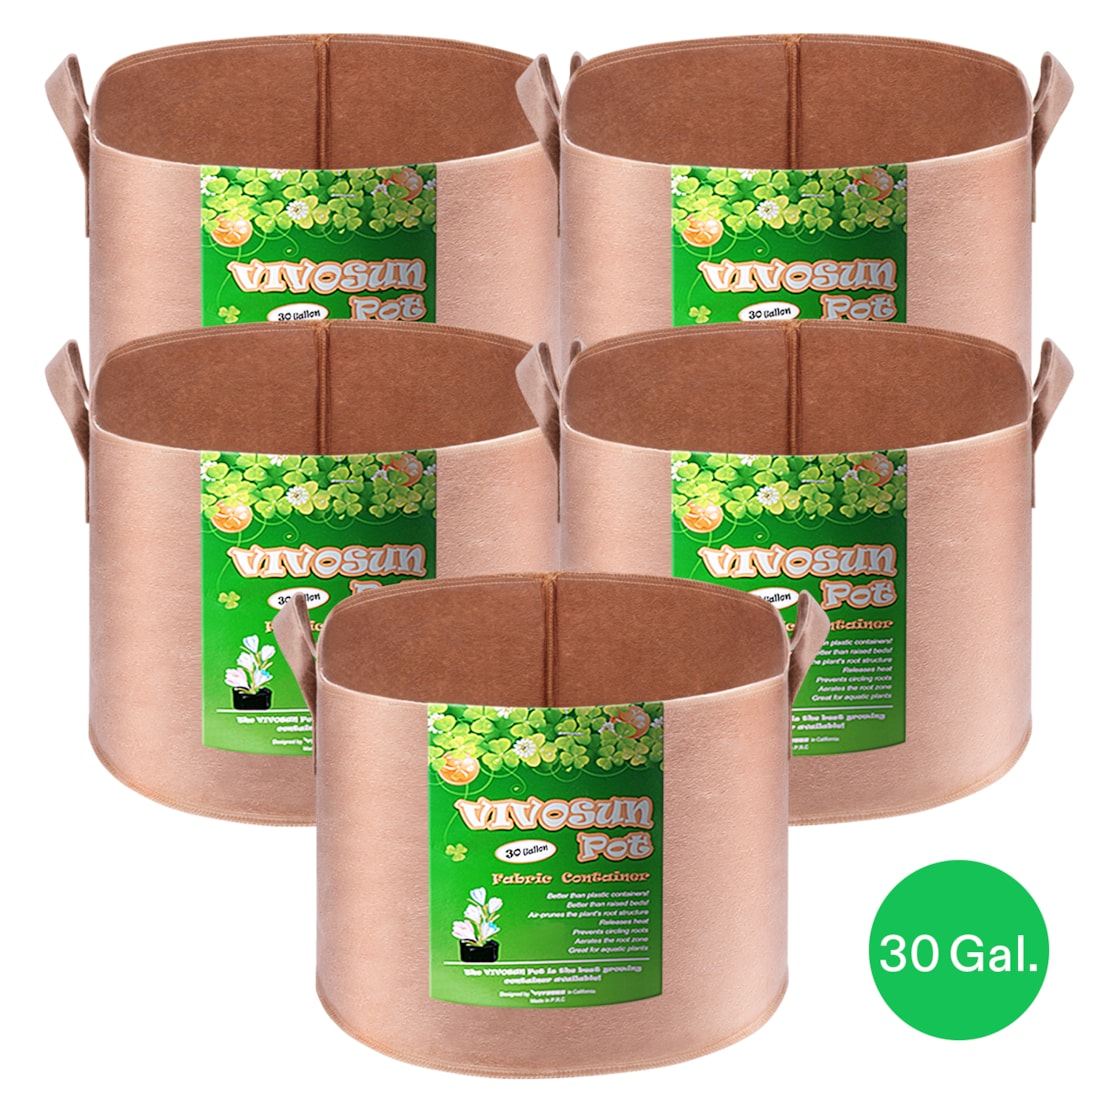 VIVOSUN 30 Gallon Grow Bags 5-Pack Brown Thickened Nonwoven Fabric Pots with Handles